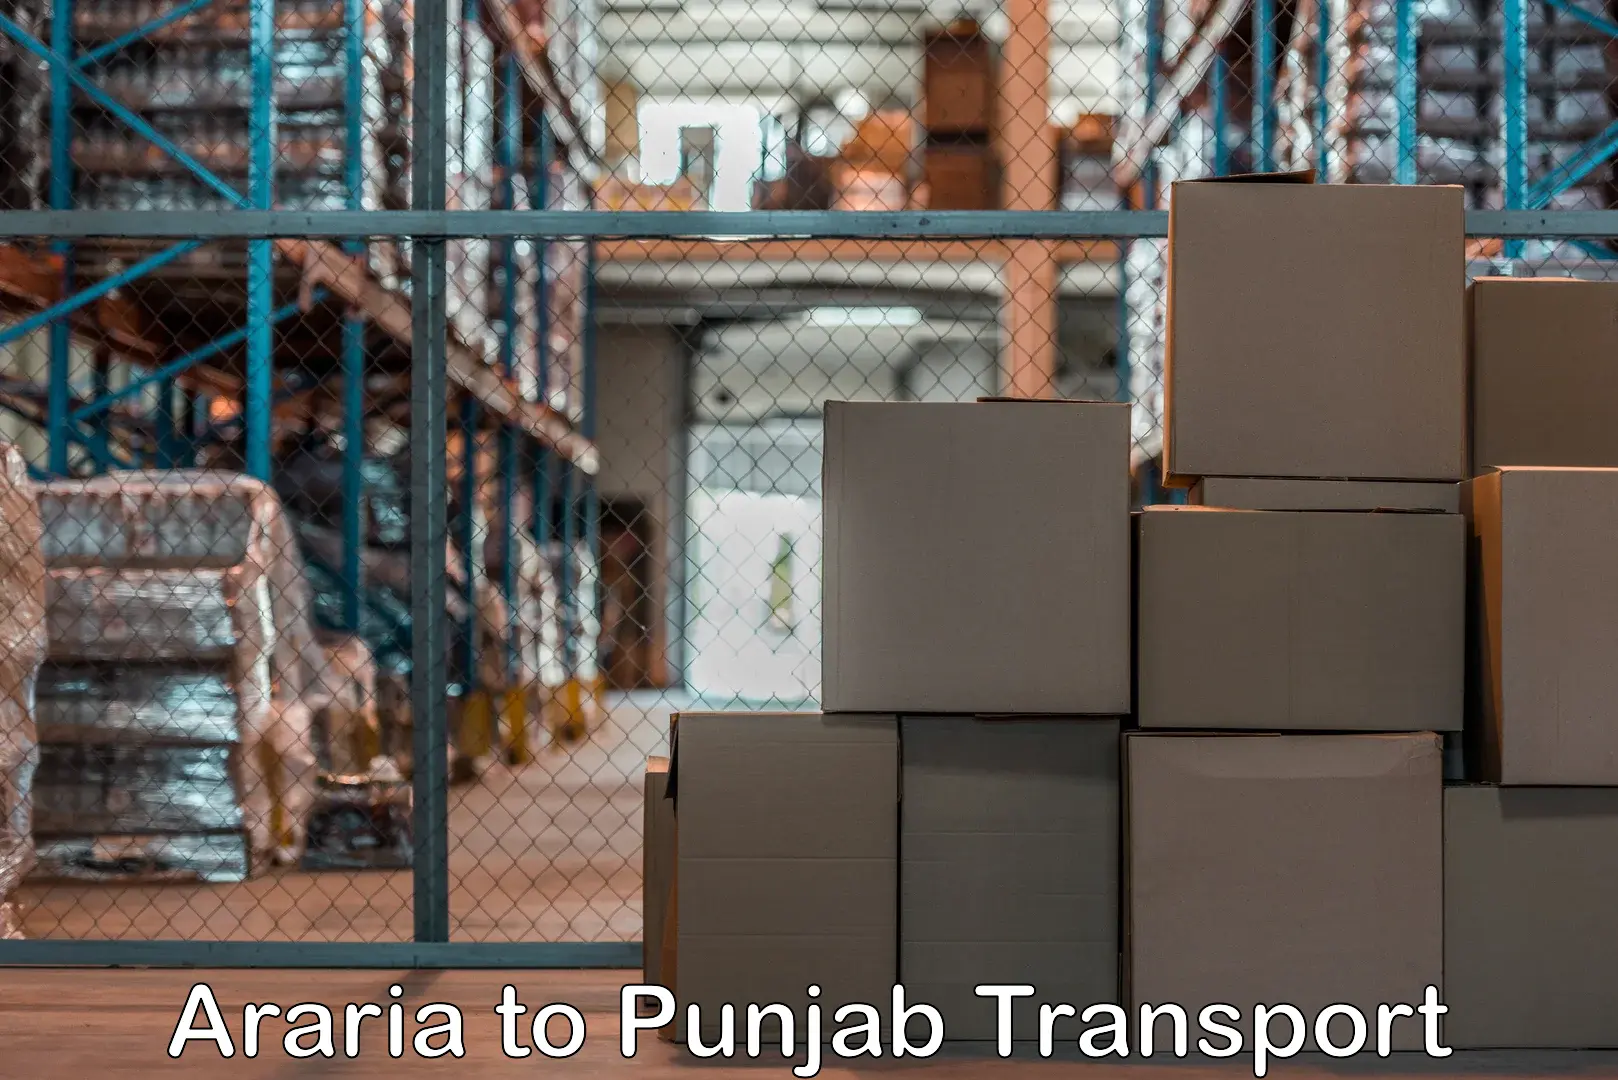 Truck transport companies in India Araria to Mohali